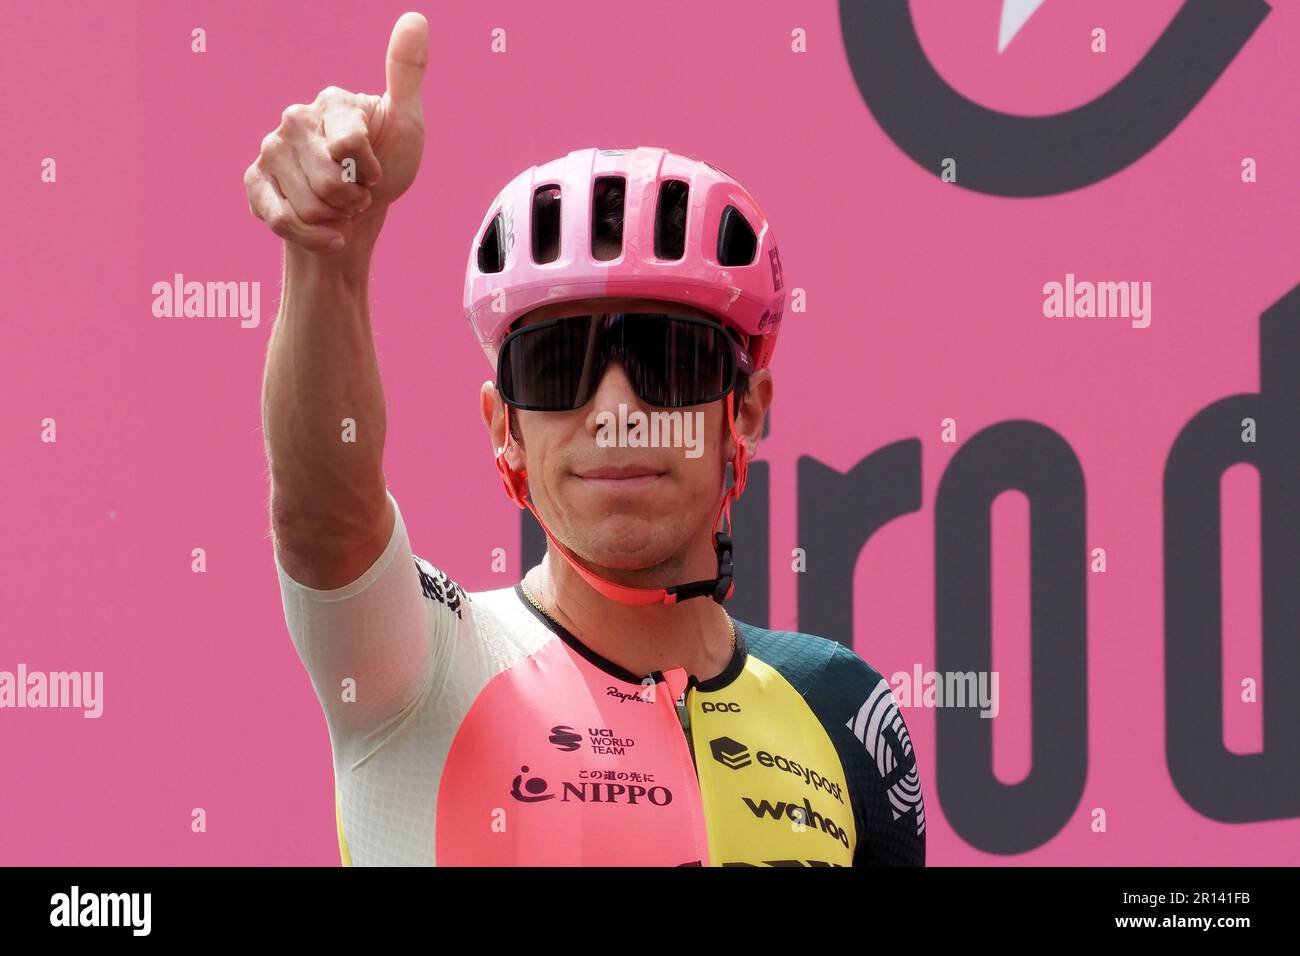 Napoli, Italy. 11th May, 2023. Rigoberto Urán Urán is a Colombian road cyclist who rides for the EF Education-EasyPost team, during the sixth stage of the Giro d'Italia with departure and arrival in Naples. Napoli, Italy, May 11, 2023. (photo by Vincenzo Izzo/Sipa USA) Credit: Sipa USA/Alamy Live News Stock Photo